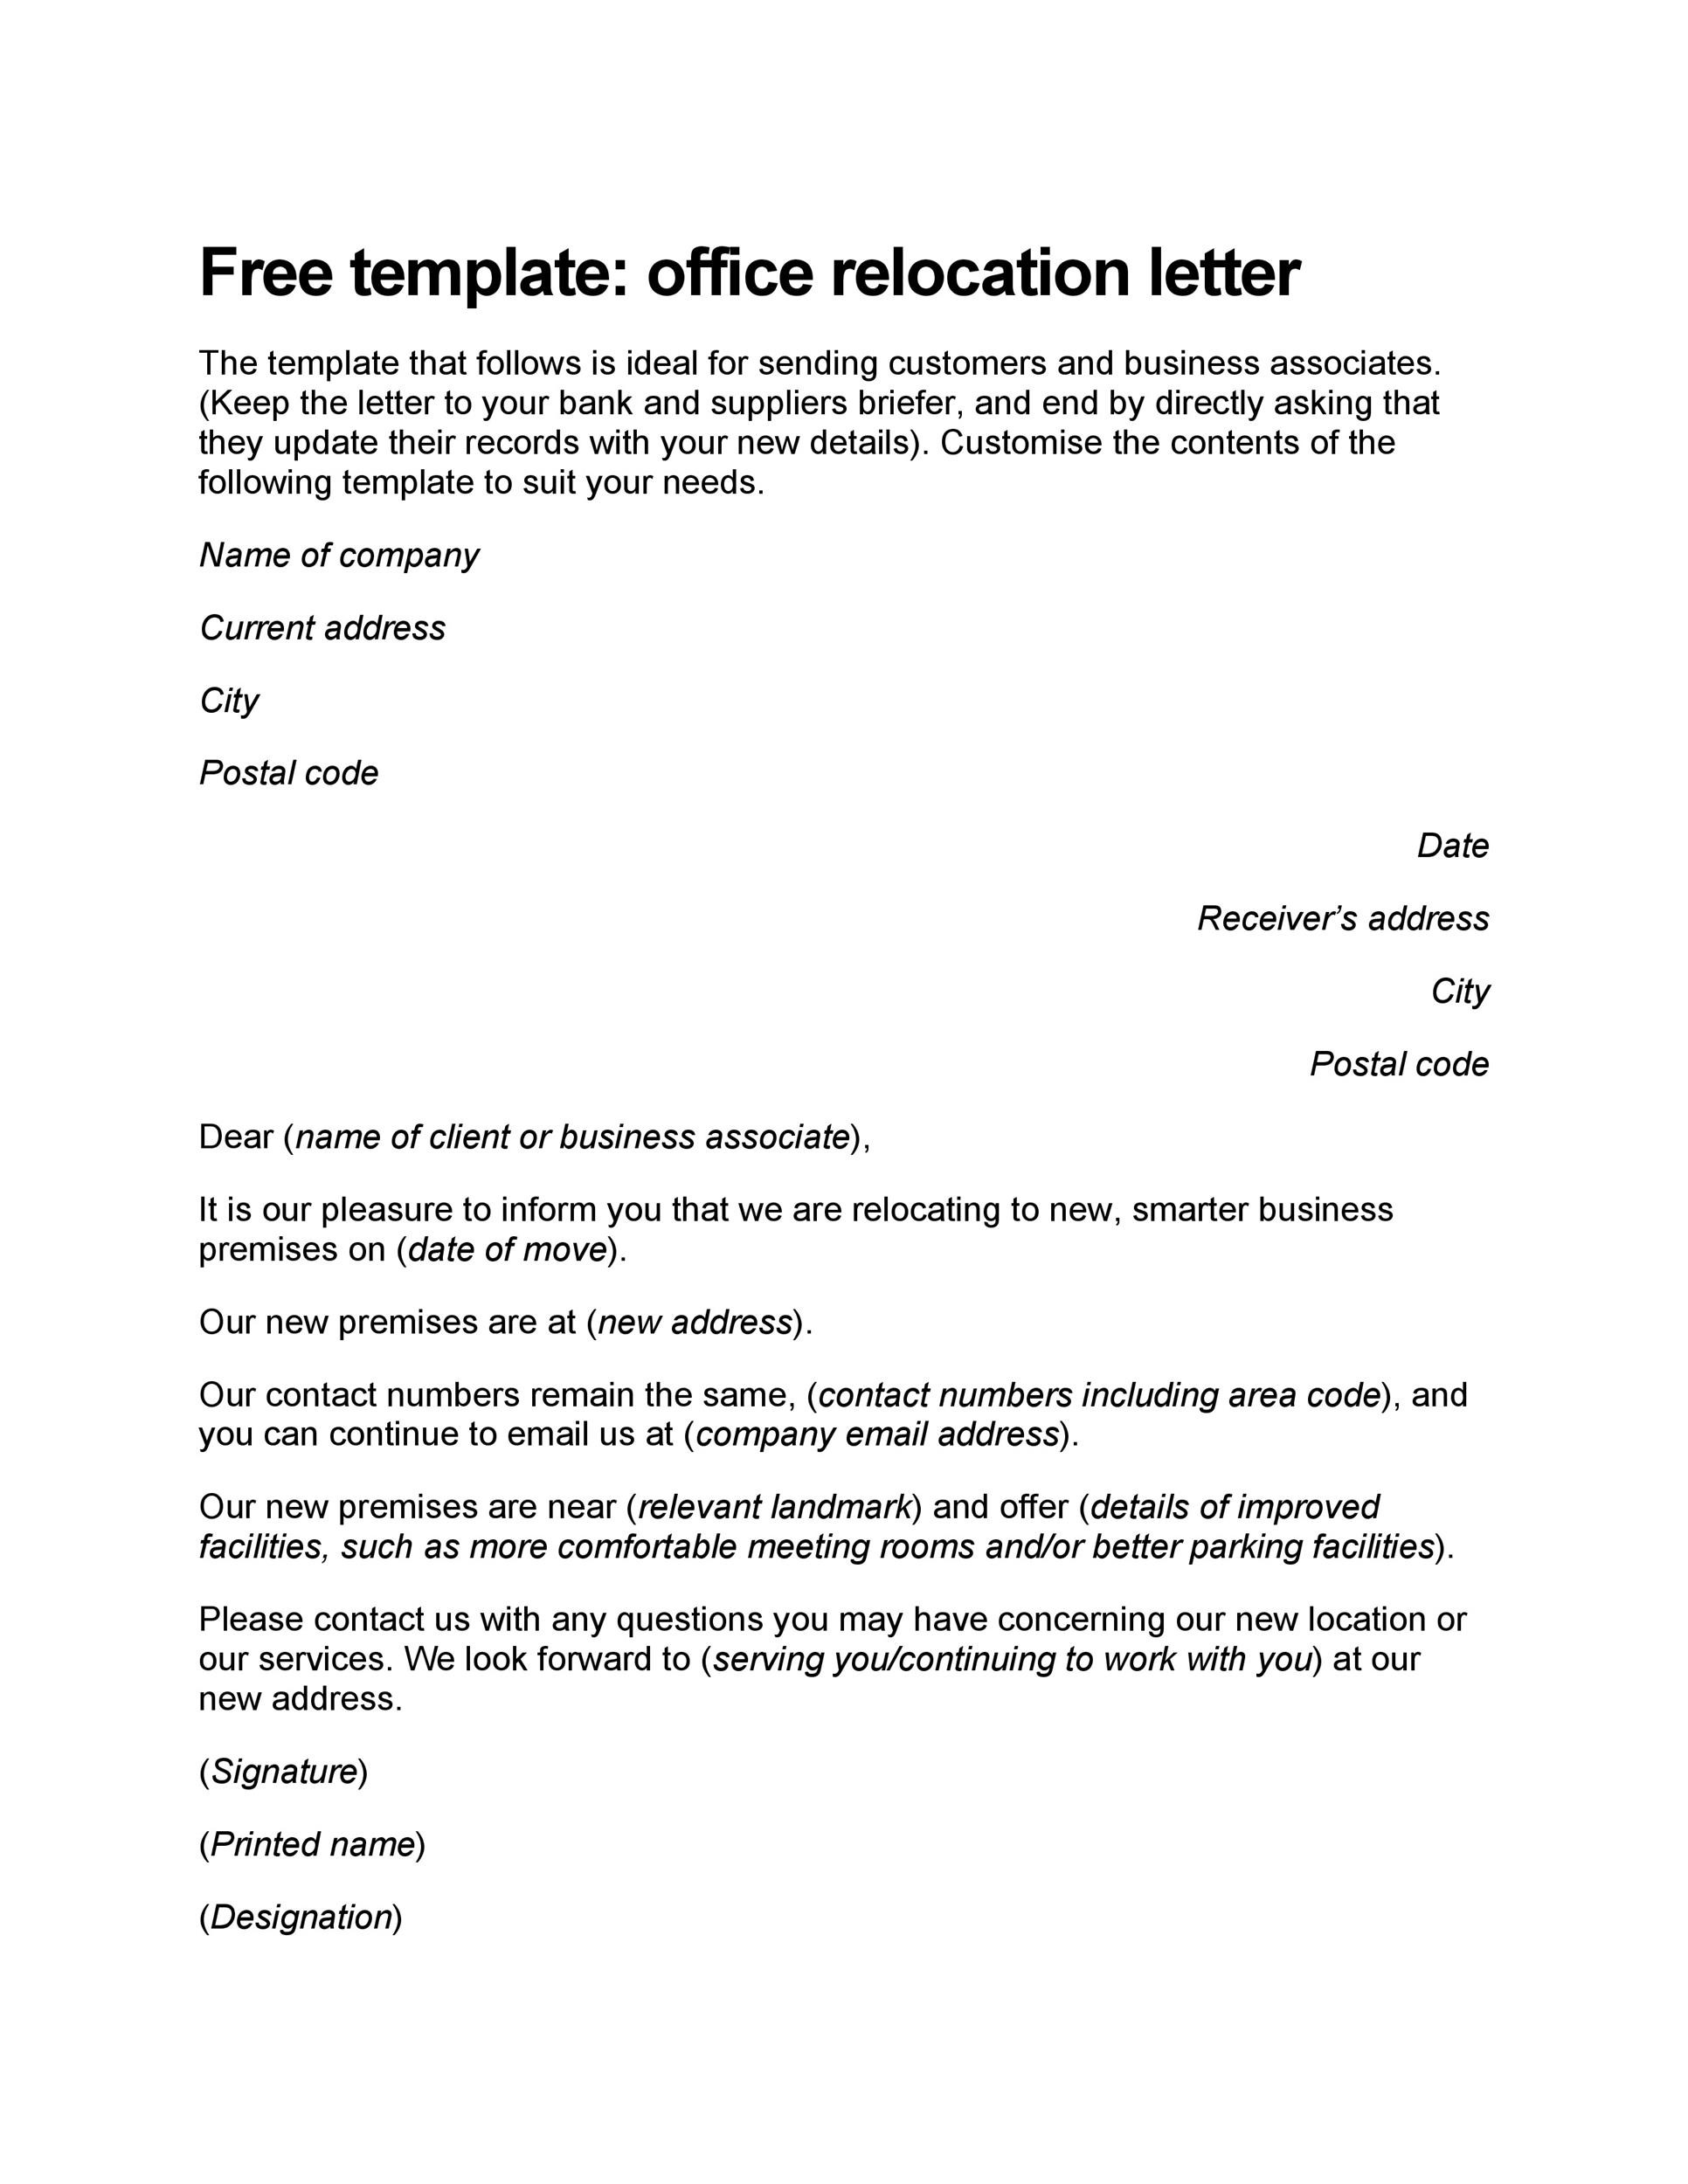 Employee Relocation Letter 01 Best Letter Template